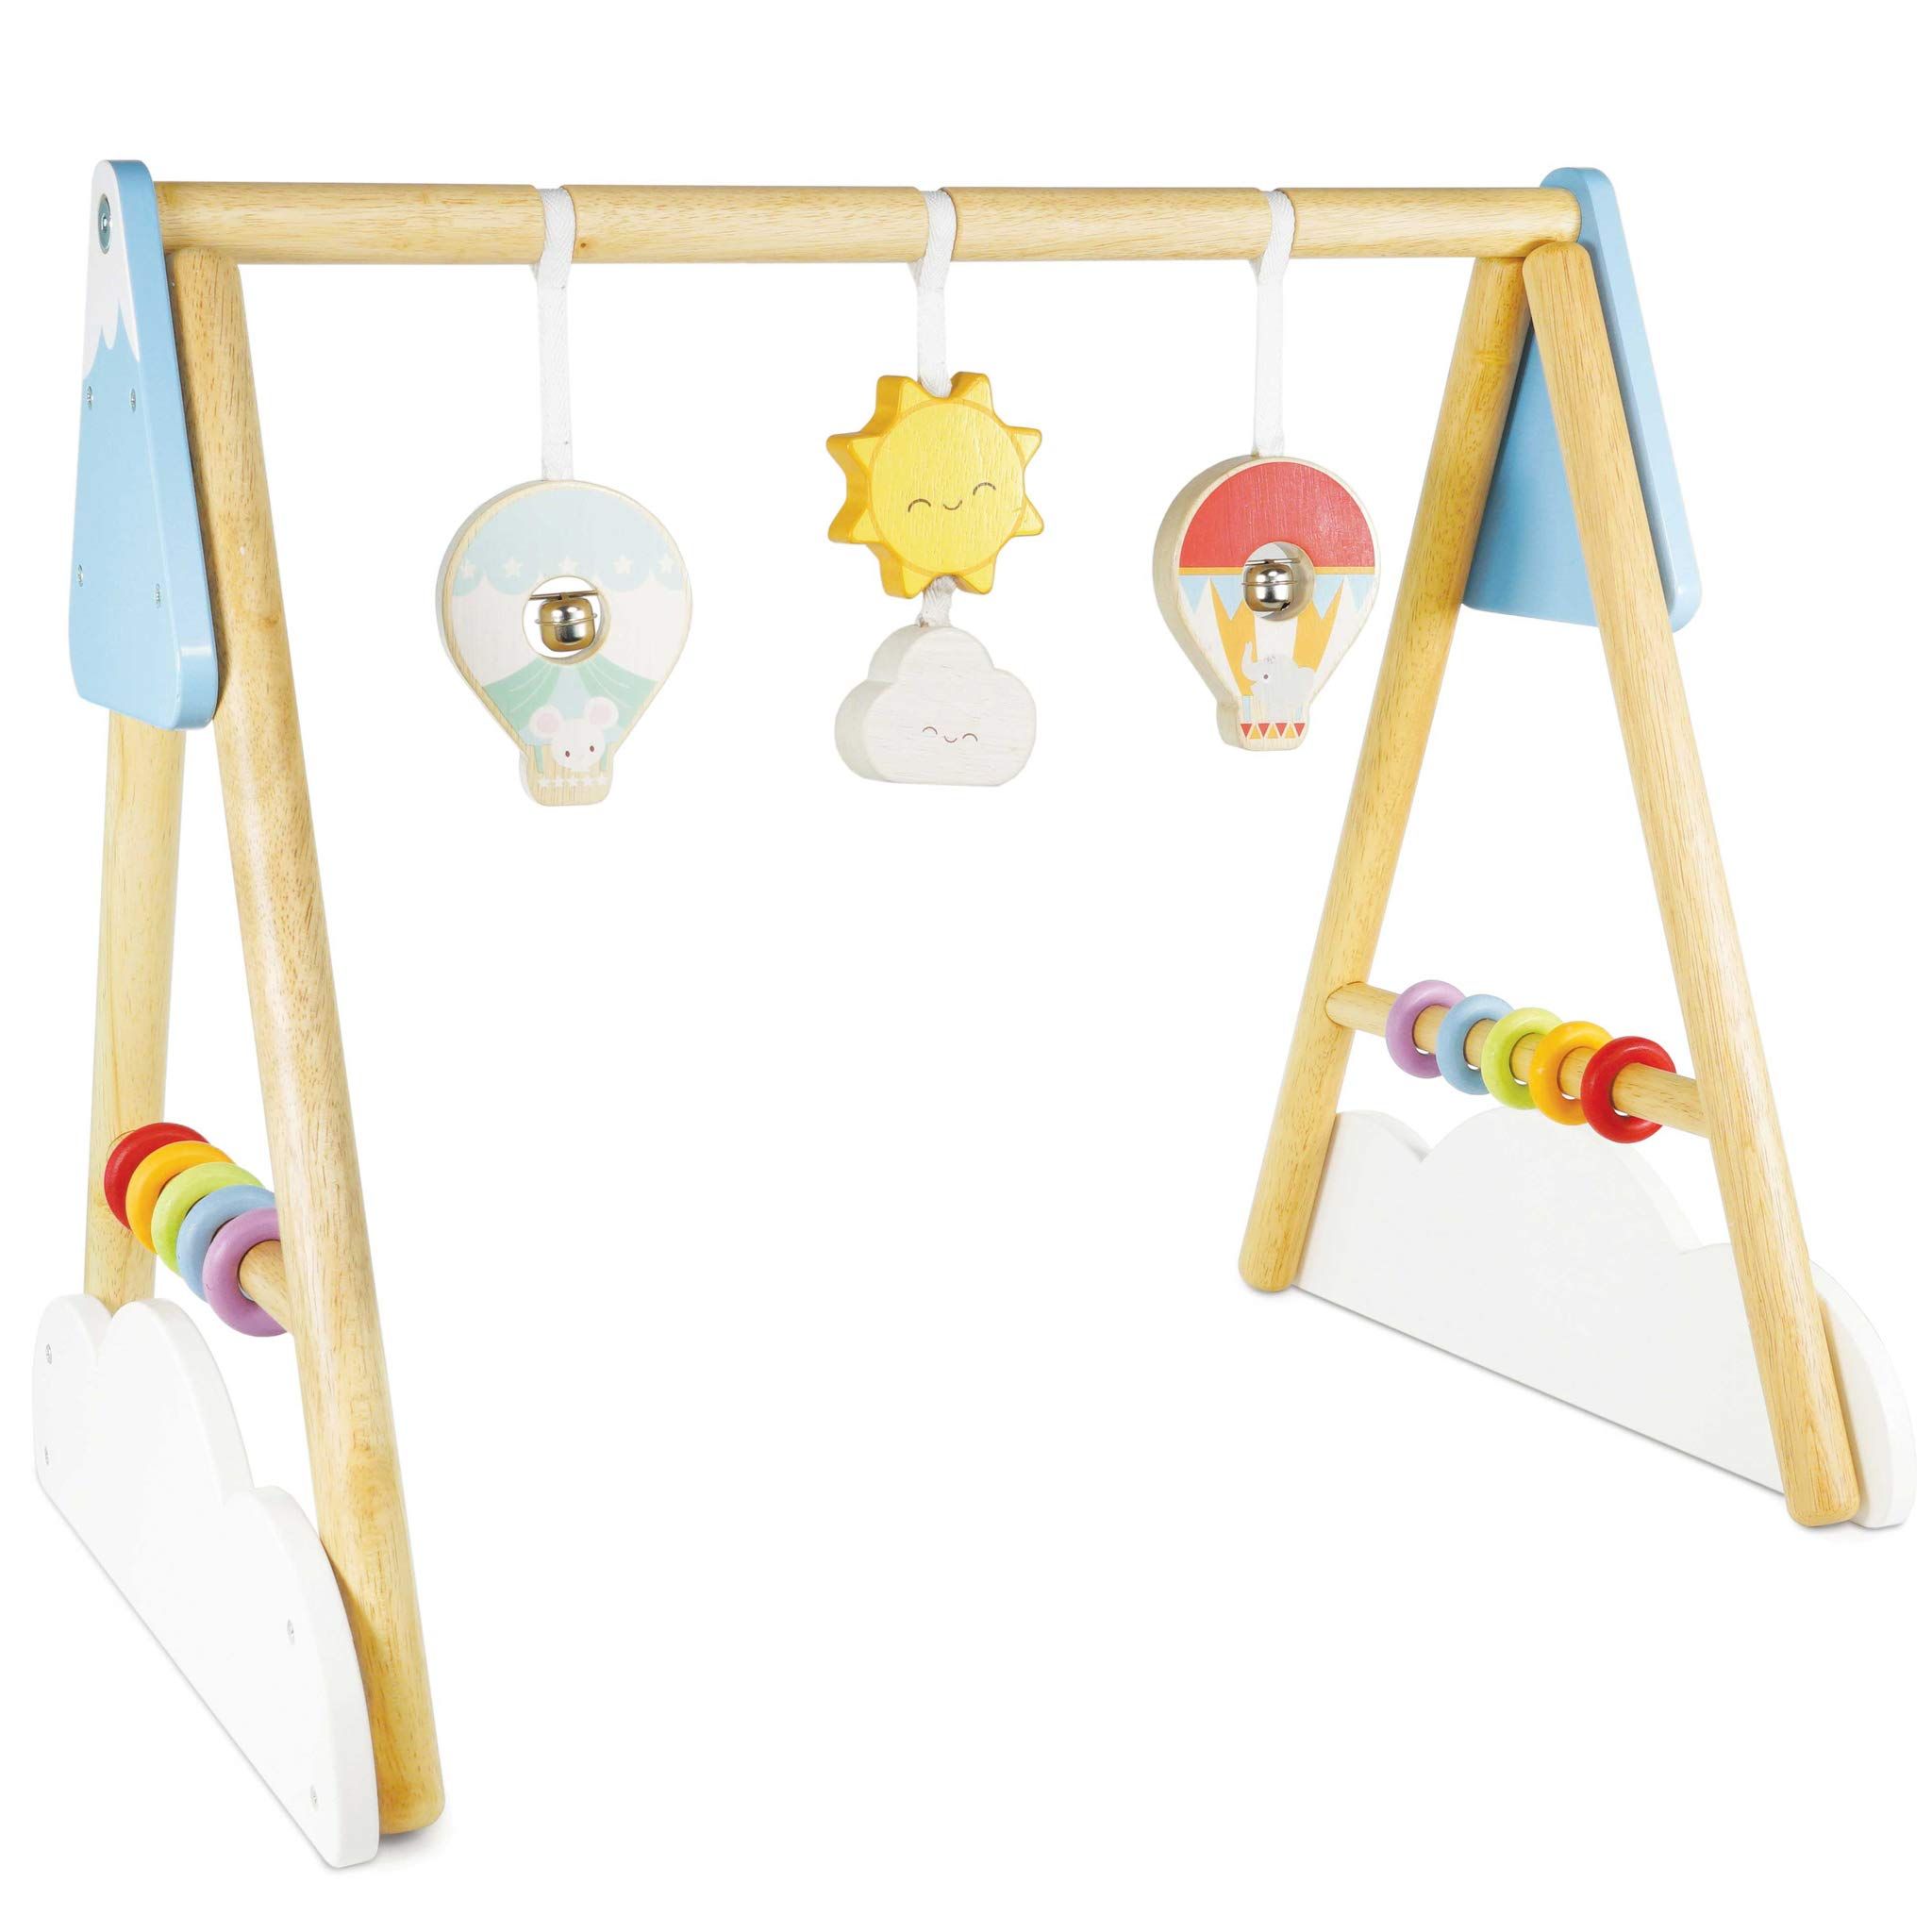 Le Toy Van Hot Air Balloon Baby Gym Premium Wooden Toys for Kids Ages 2 Months & Up | Amazon (US)